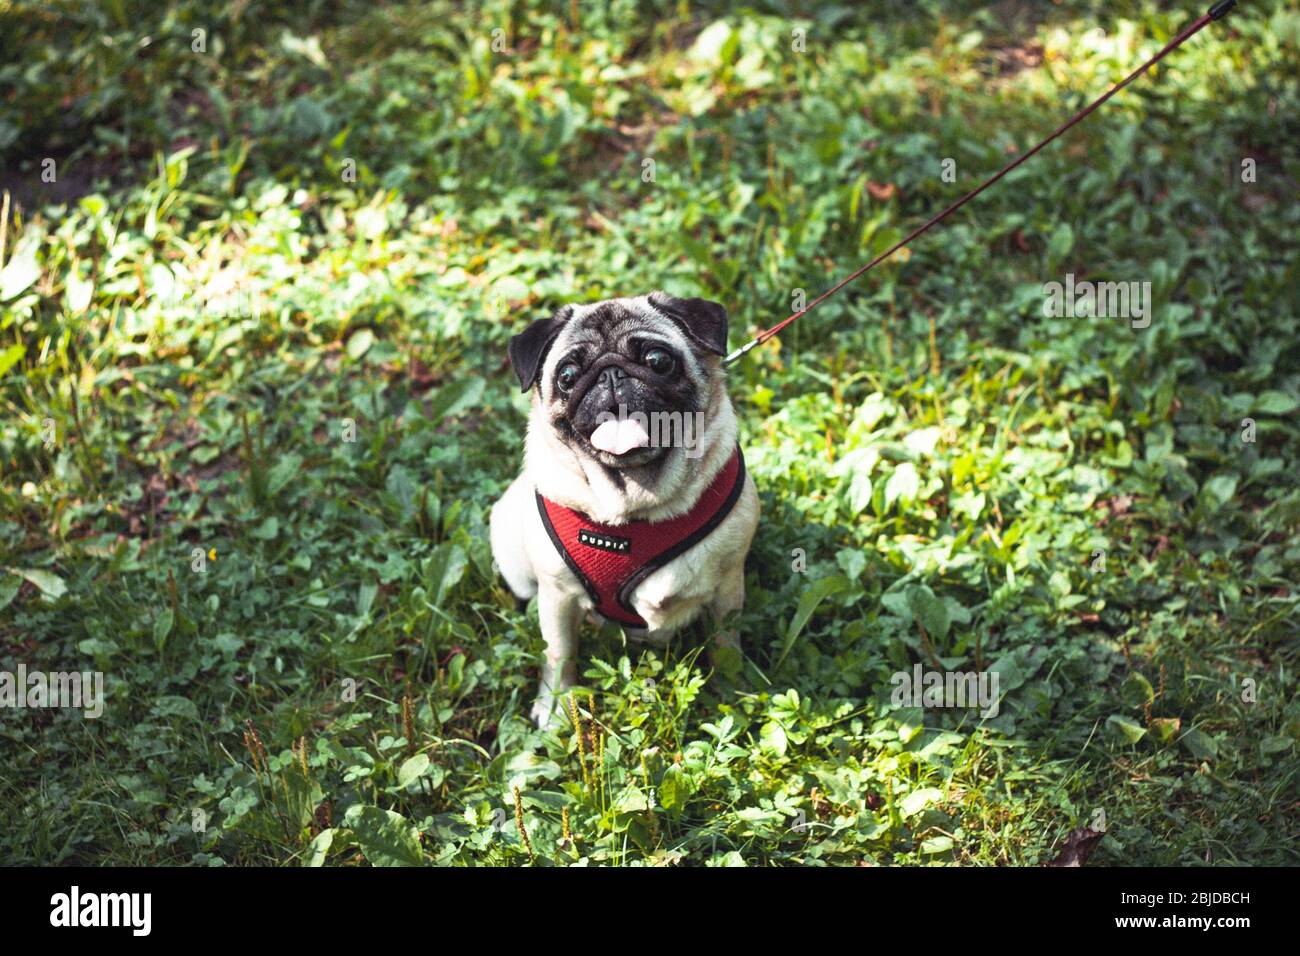 Cute little pug smiling Stock Photo